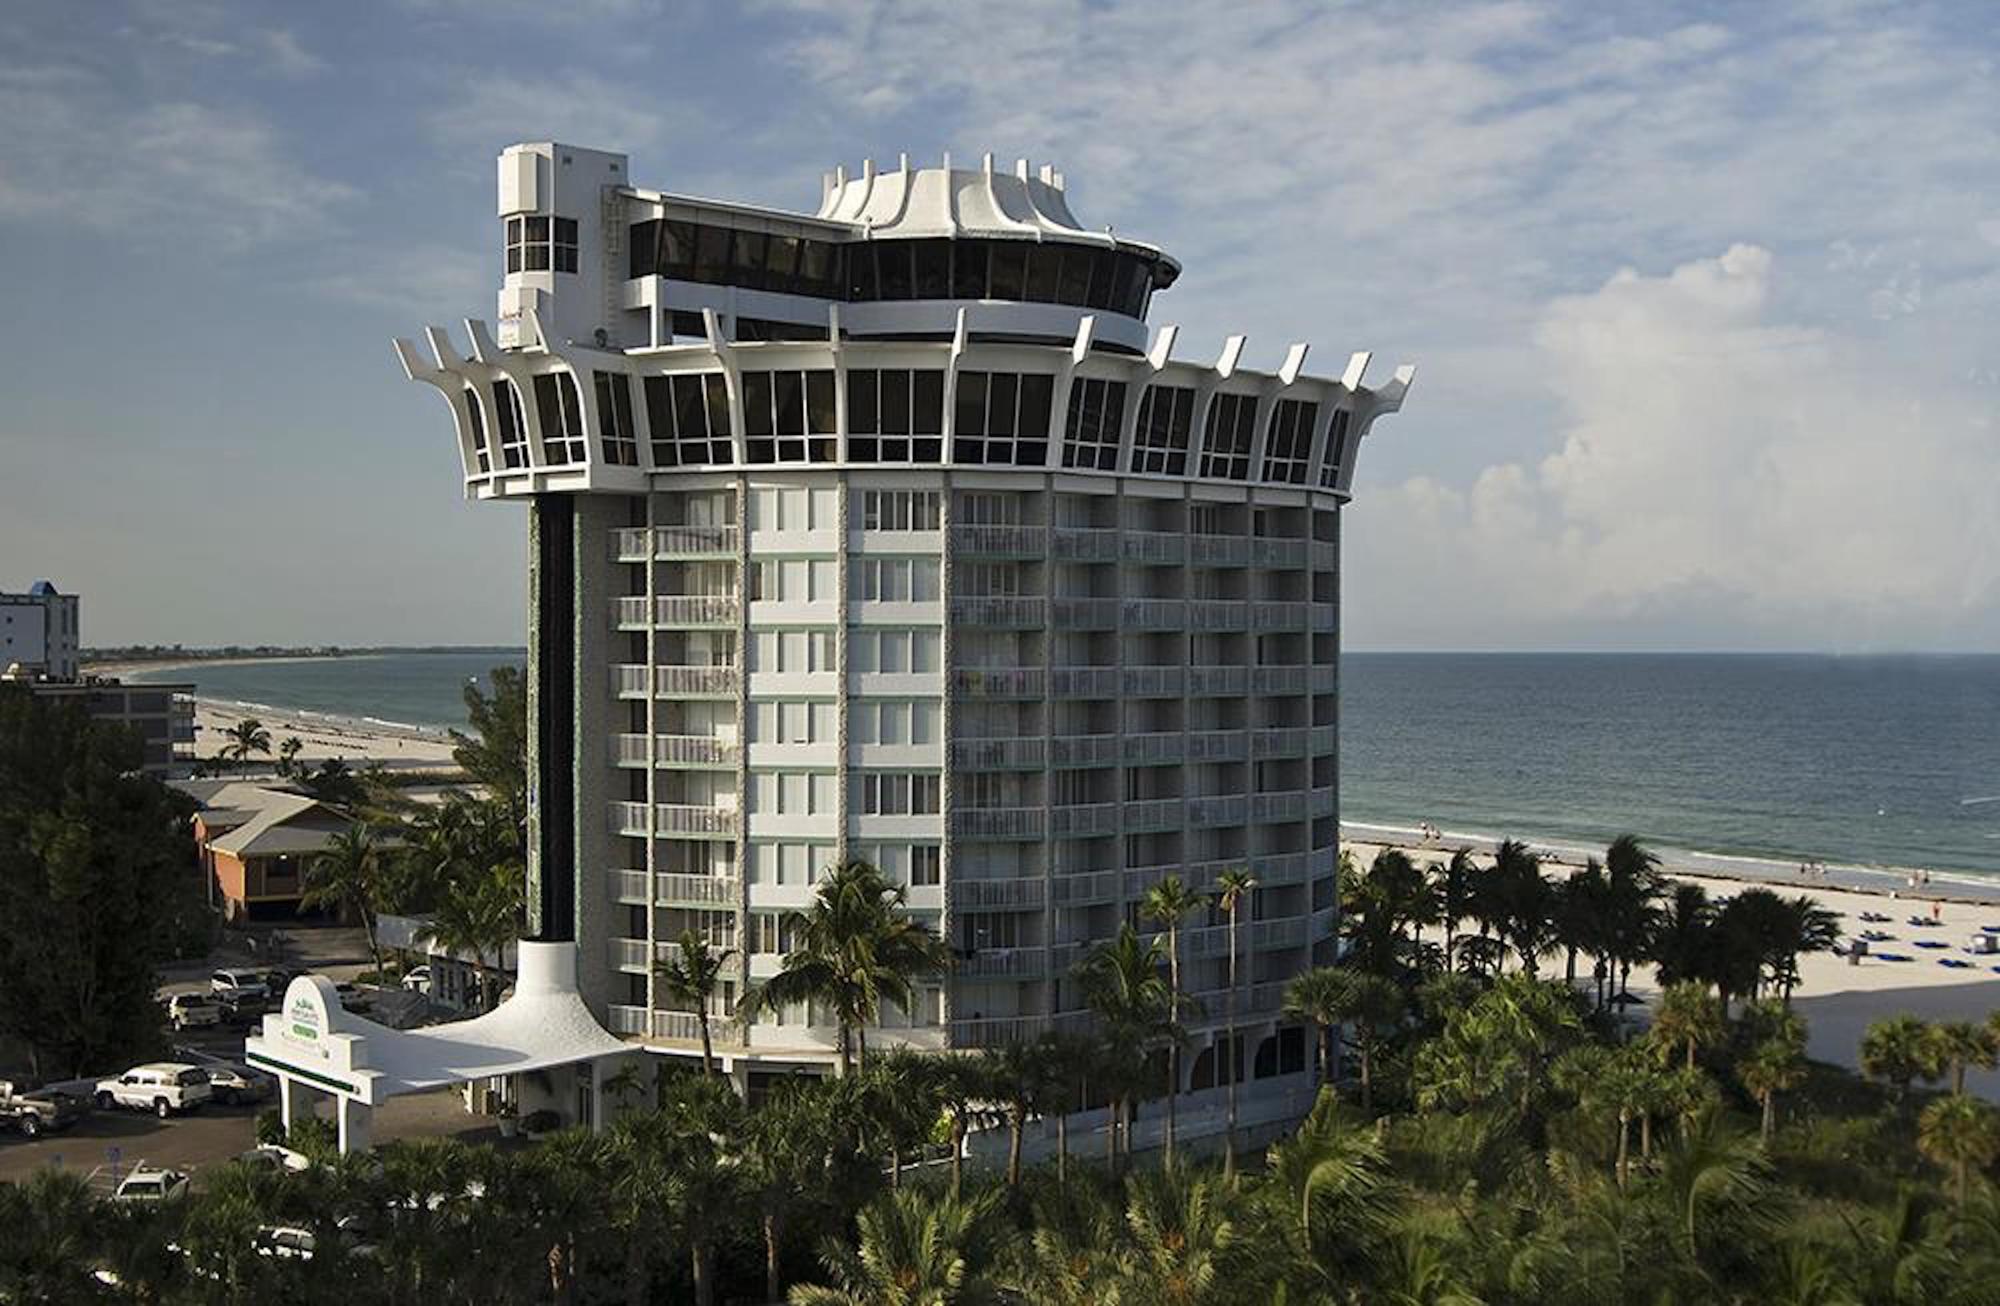 The 10-story Grand Plaza Resort will likely receive the bulk of $24 million in improvements from new owner Gencom Group.